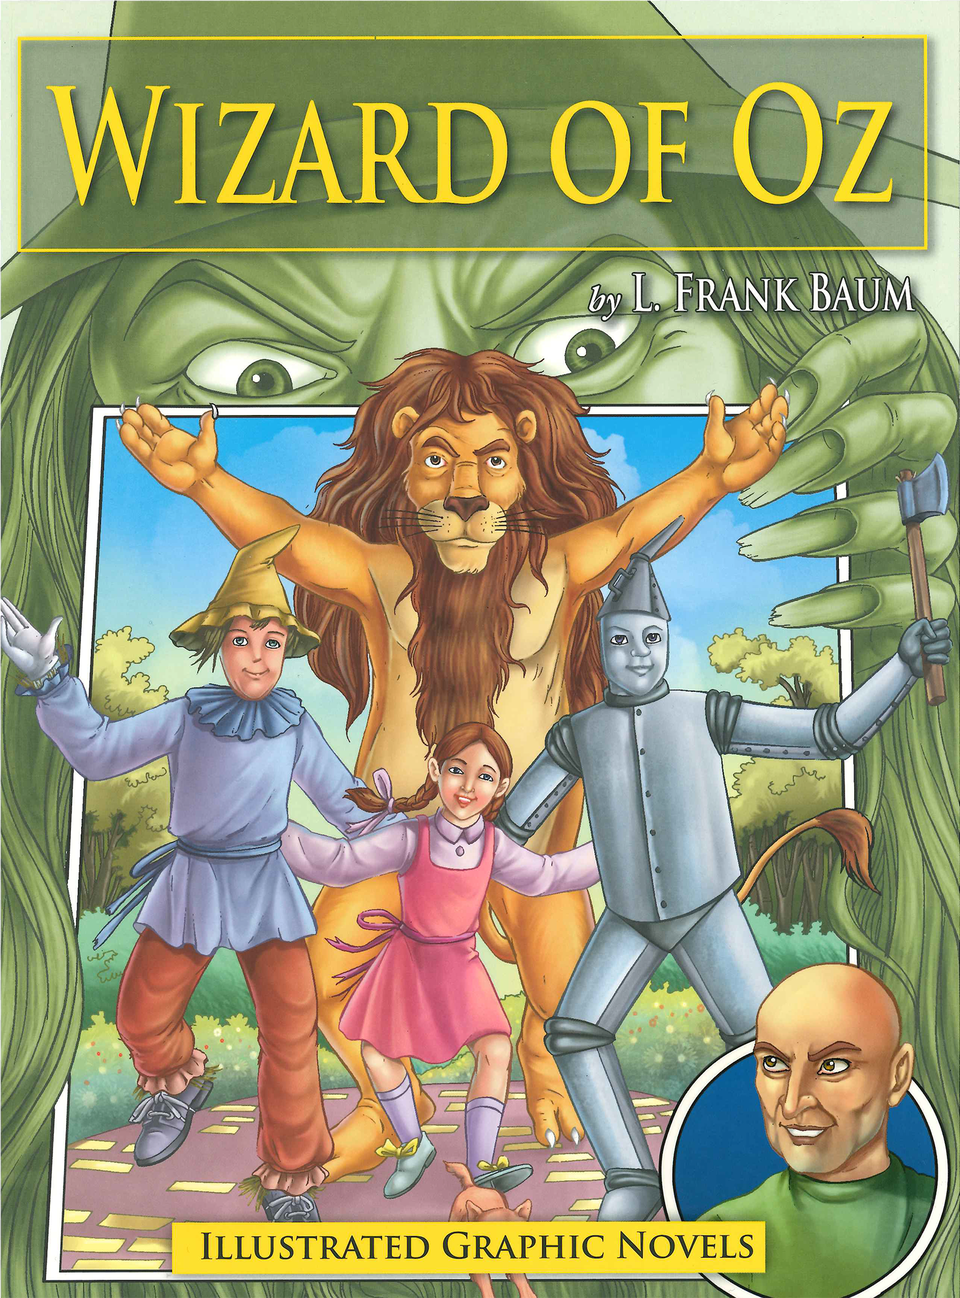 Wizard Of Oz Puts A Modern Spin On A Beloved Story Wizard Of Oz Illustrated Graphic Novels Book Free Png